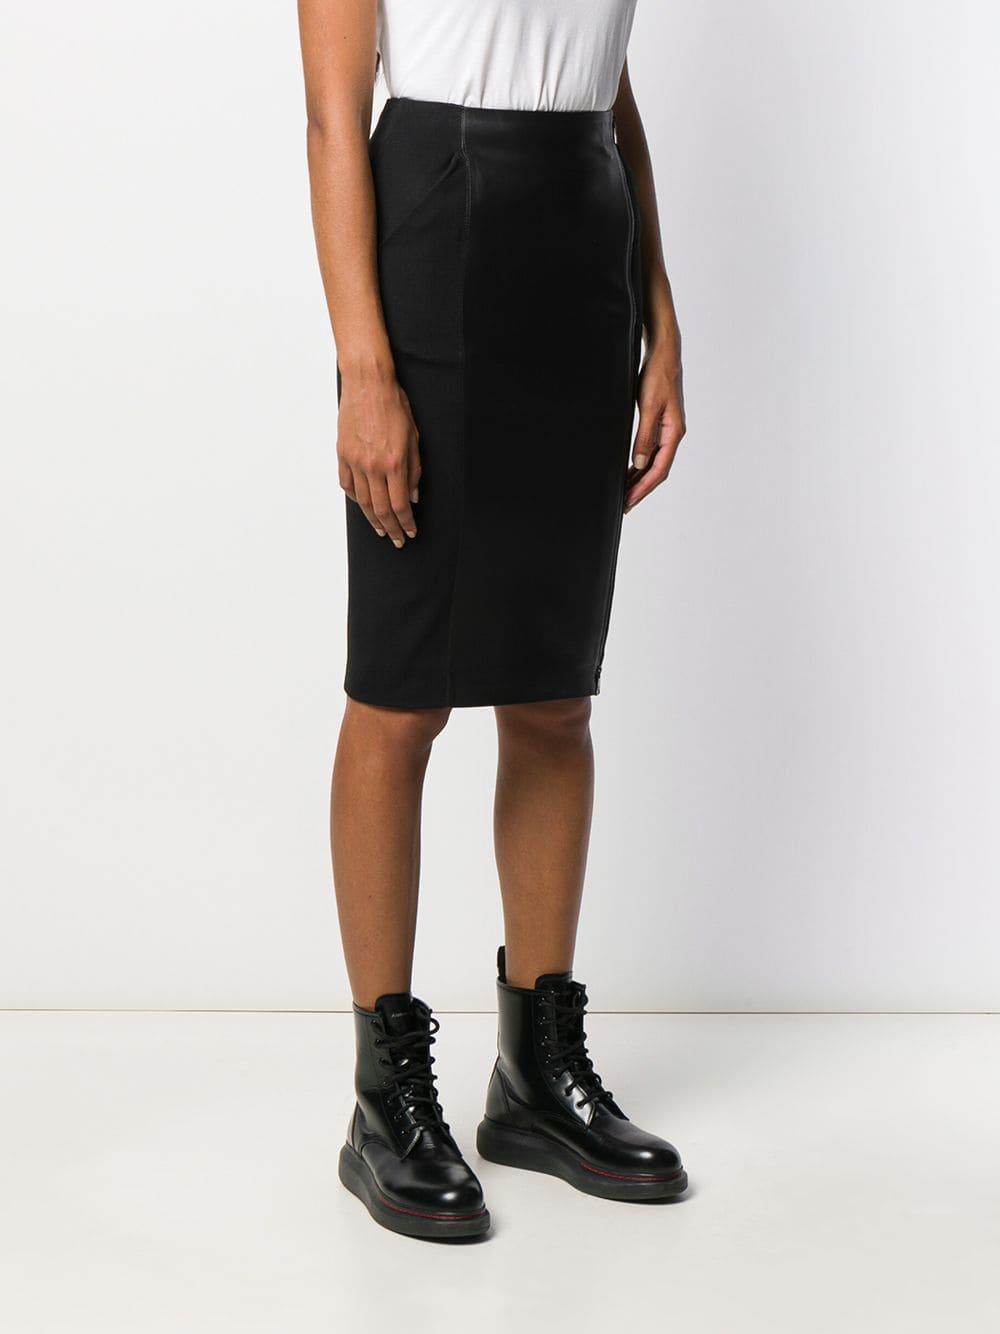 Karl Lagerfeld Leather Zip Up Pencil Skirt in Black - Lyst